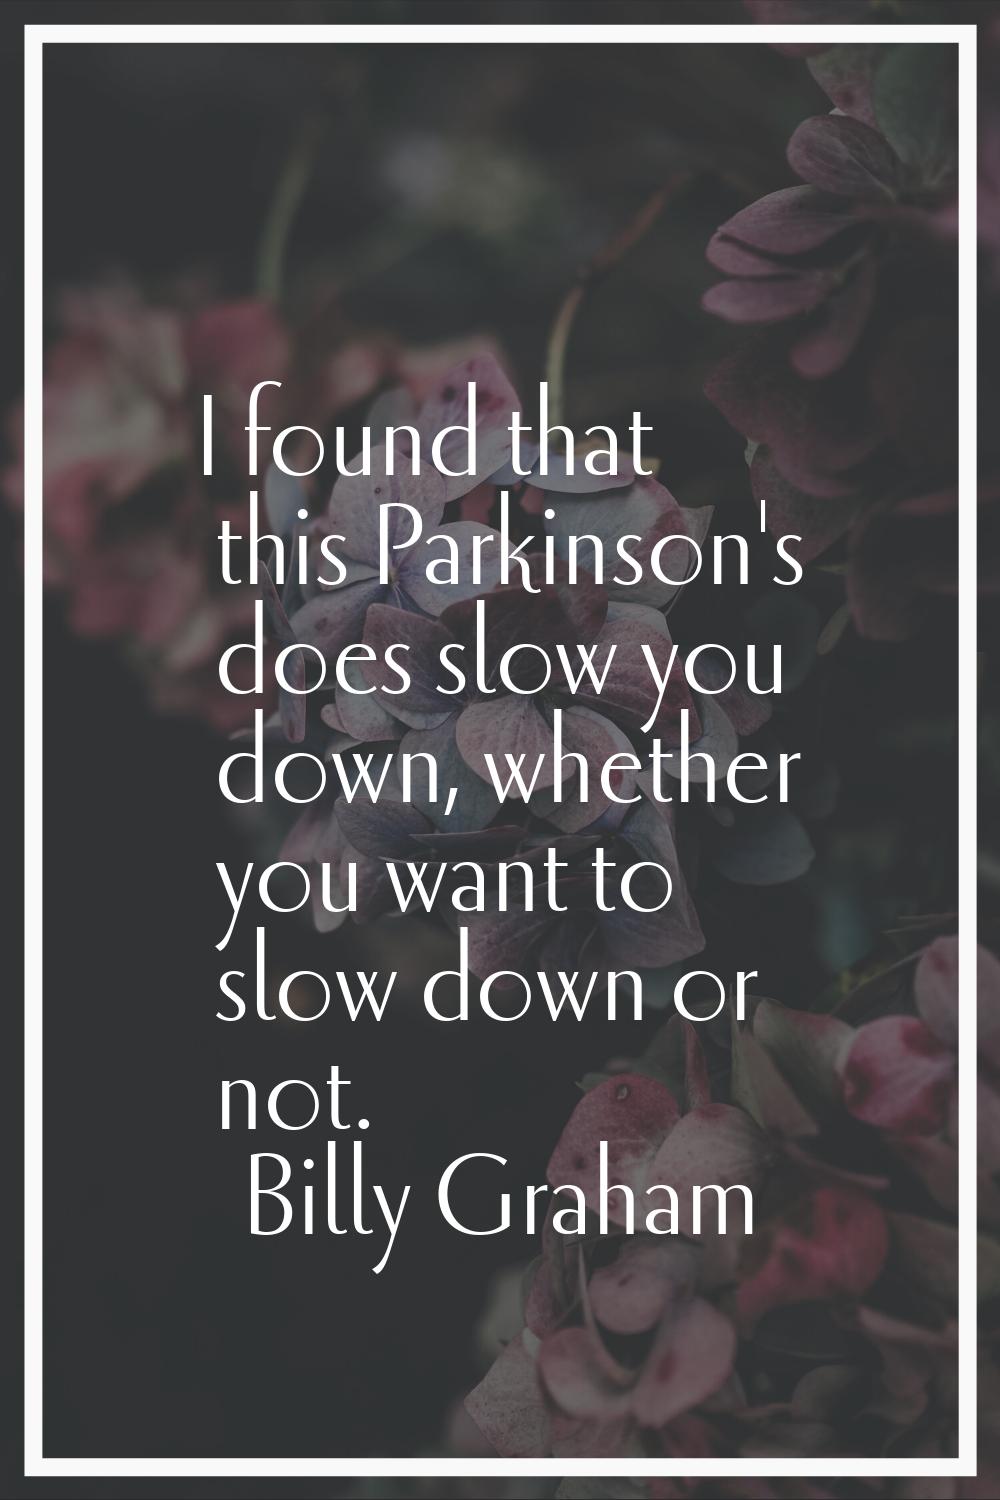 I found that this Parkinson's does slow you down, whether you want to slow down or not.